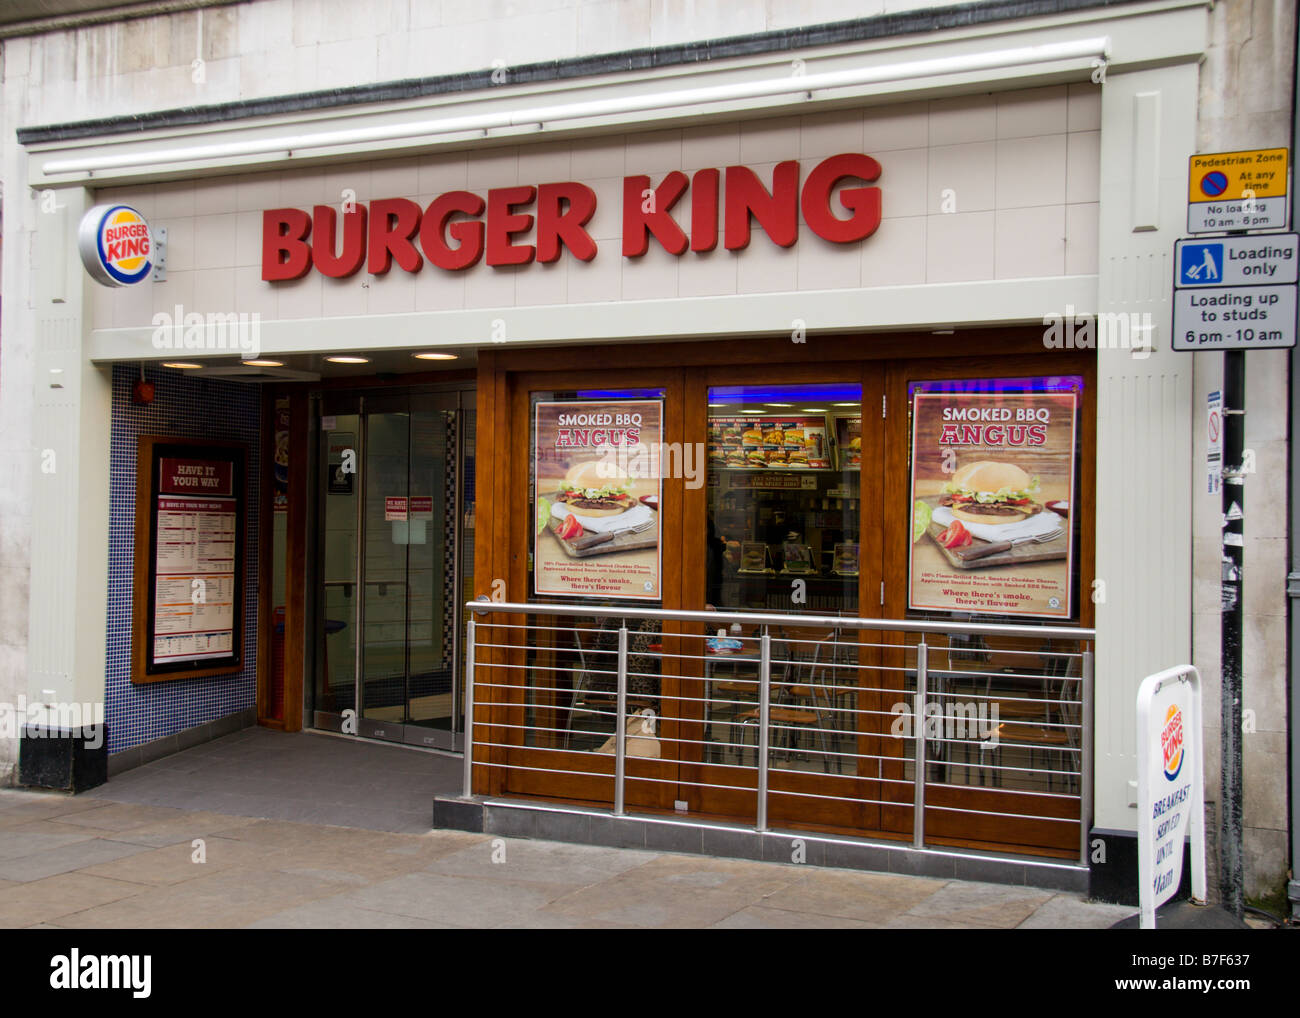 The store front of a Buger King fast food restaurant in Oxford England. Jan 2009 Stock Photo